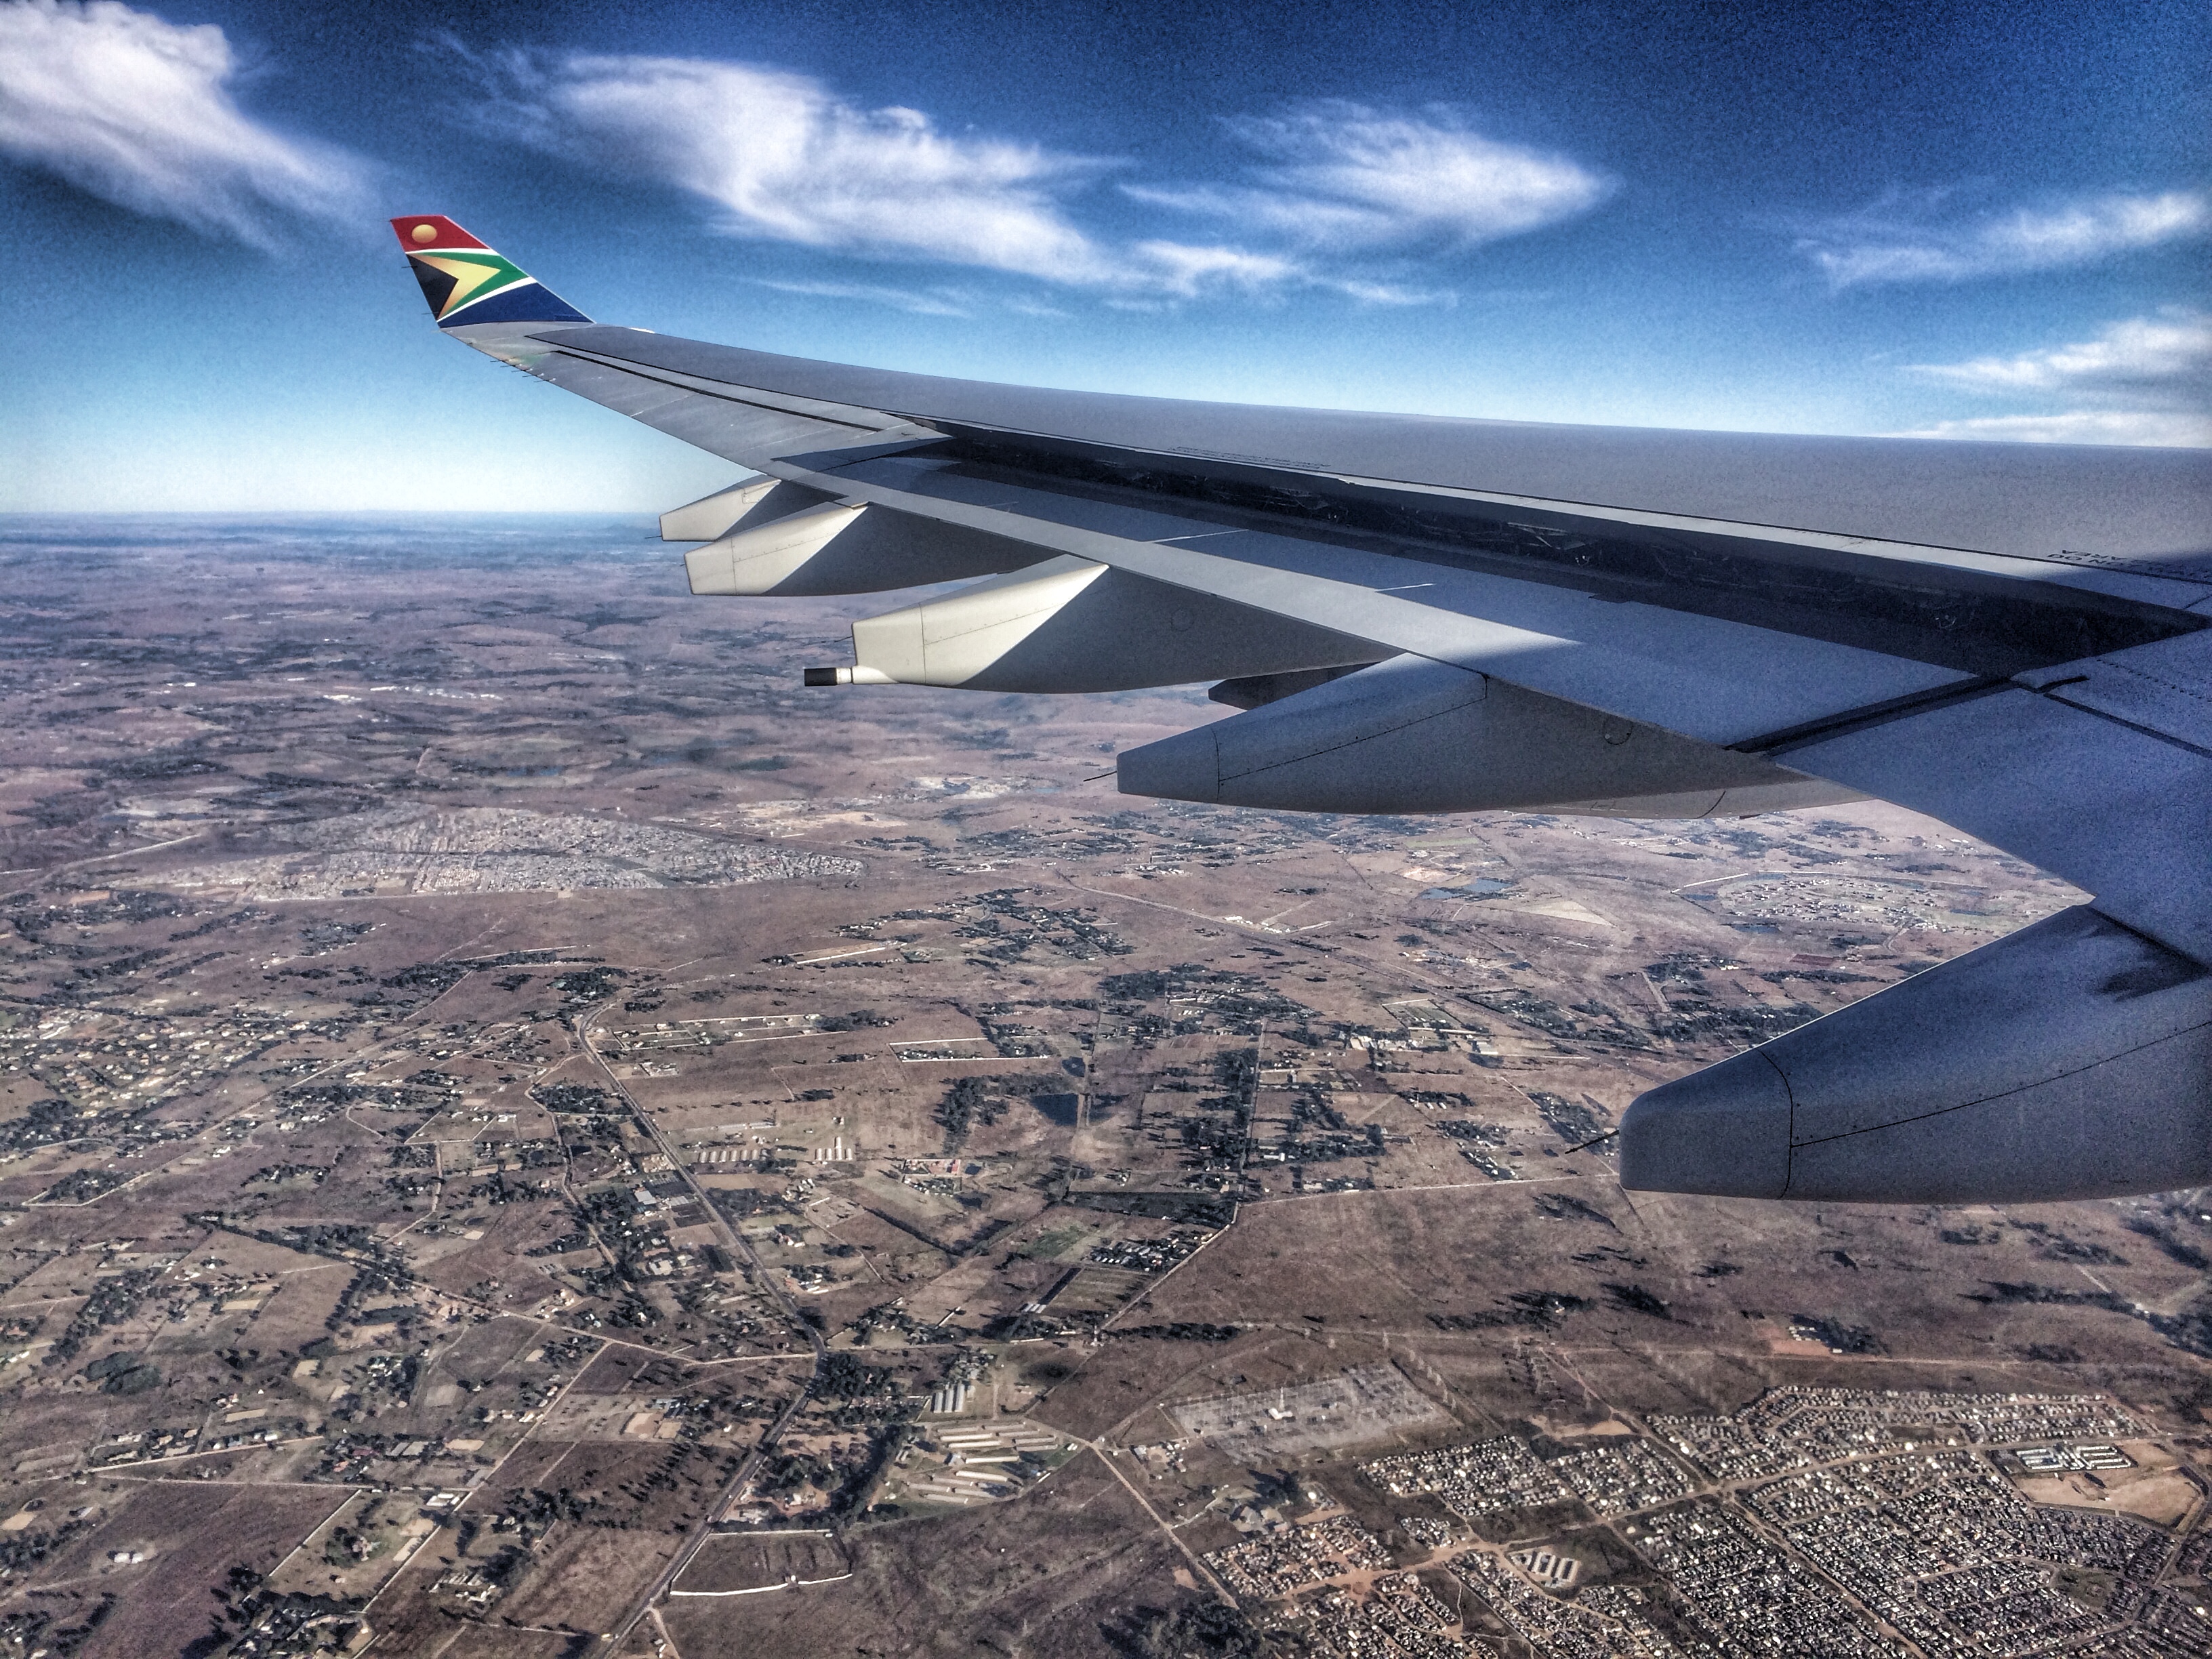 Flying into Johannesburg, South Africa - photo by Renel Holton / www.renelholton.com